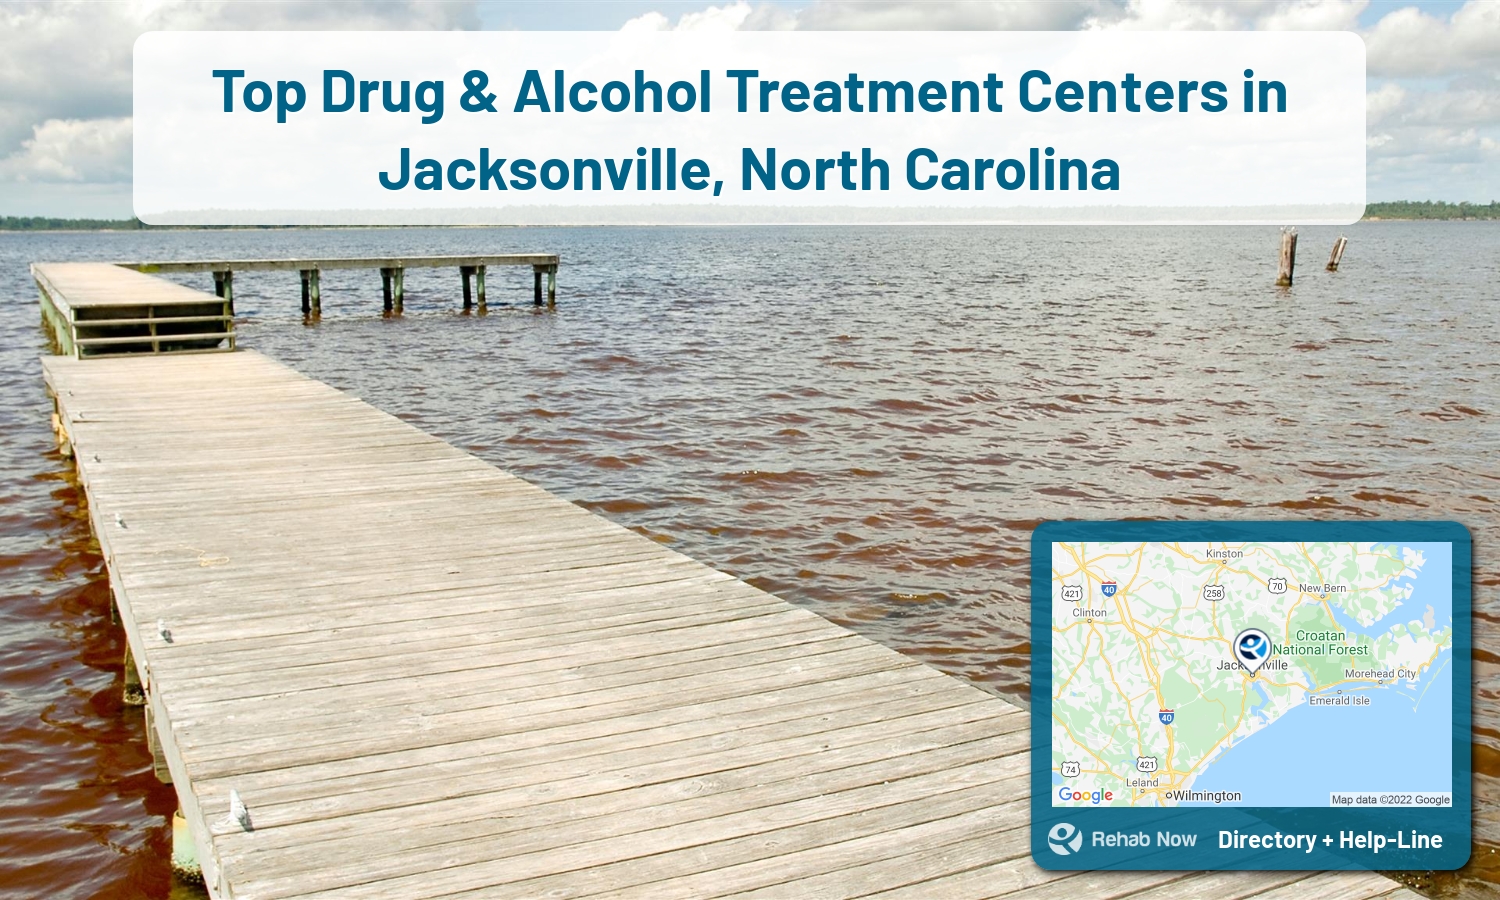 Jacksonville, NC Treatment Centers. Find drug rehab in Jacksonville, North Carolina, or detox and treatment programs. Get the right help now!